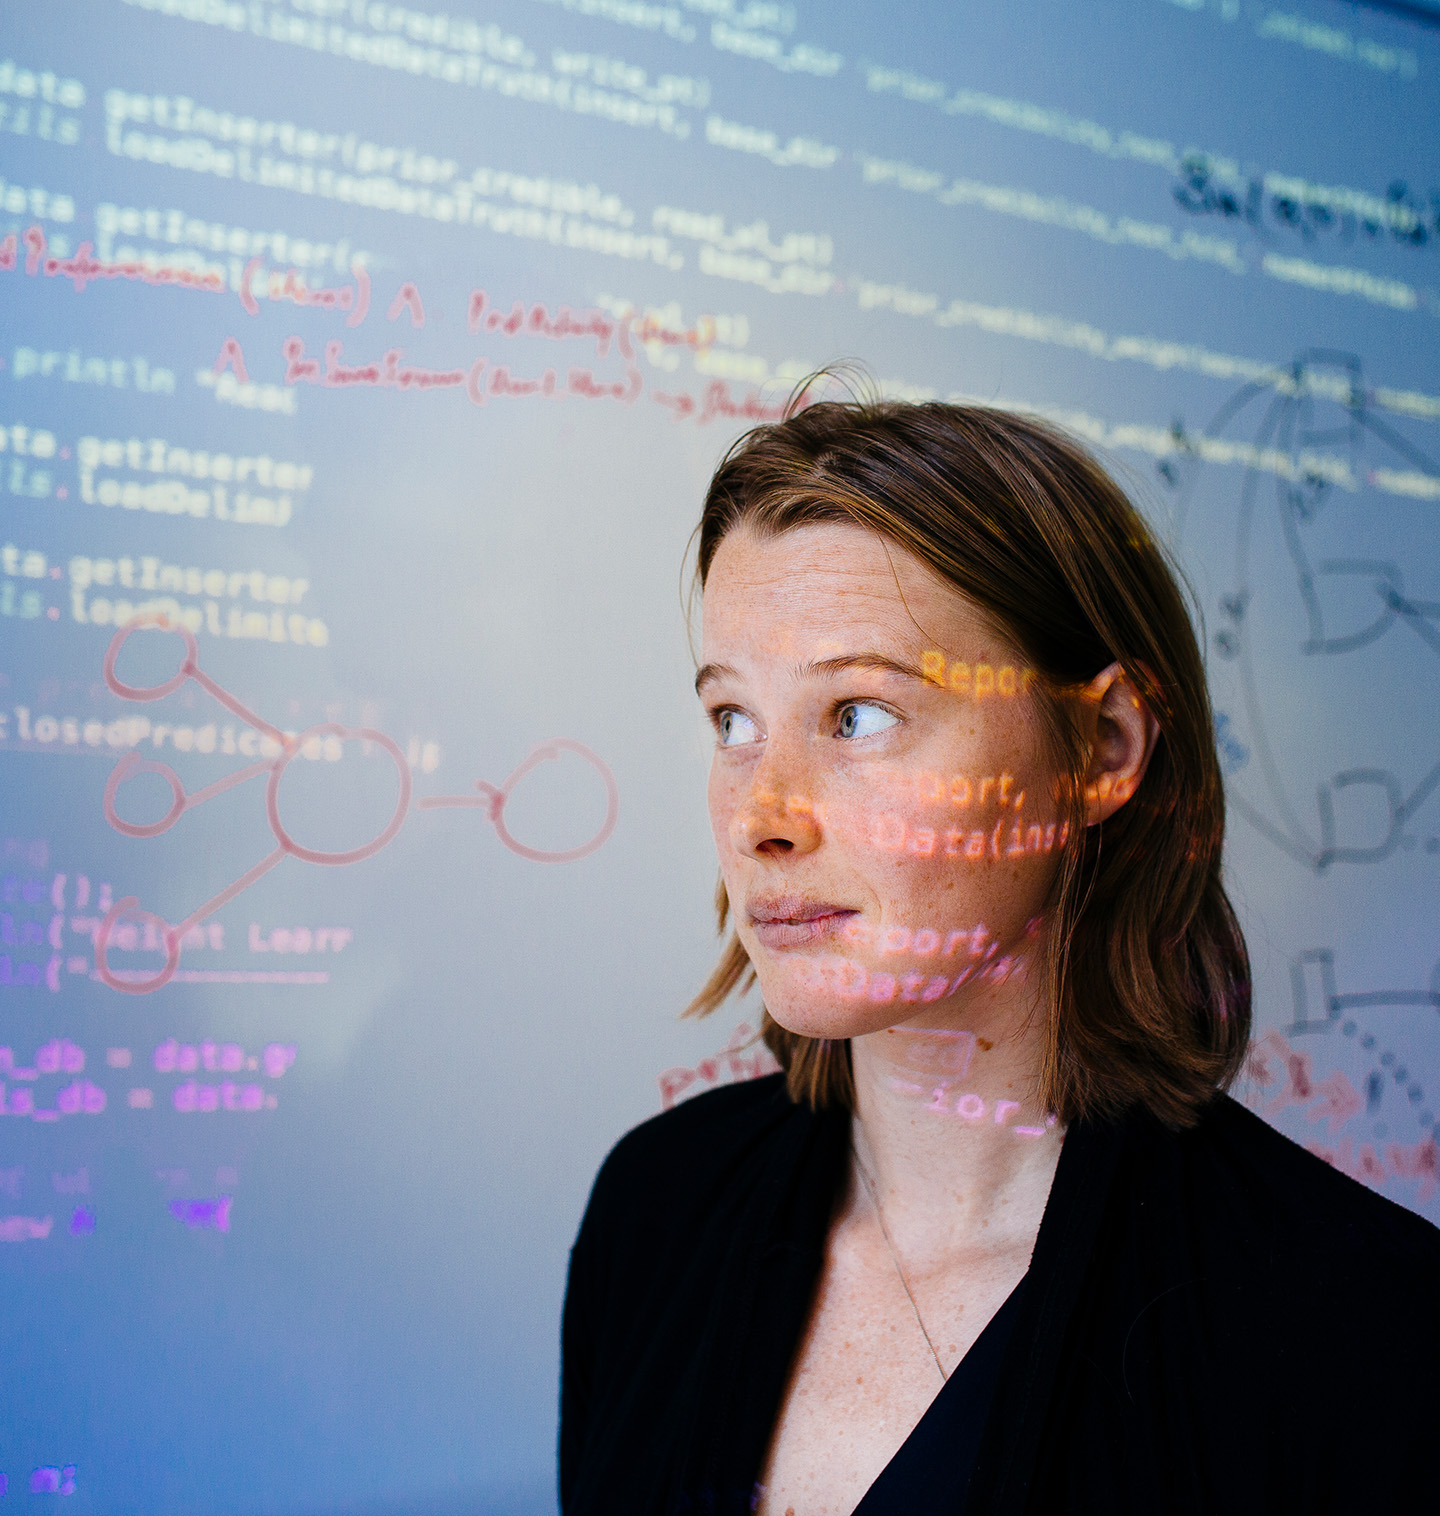 A young woman quarter-faces the camera, looking up and to the right. She's standing in front of a white board with some technical drawings, and computer code is projected on the white board and onto her face. 